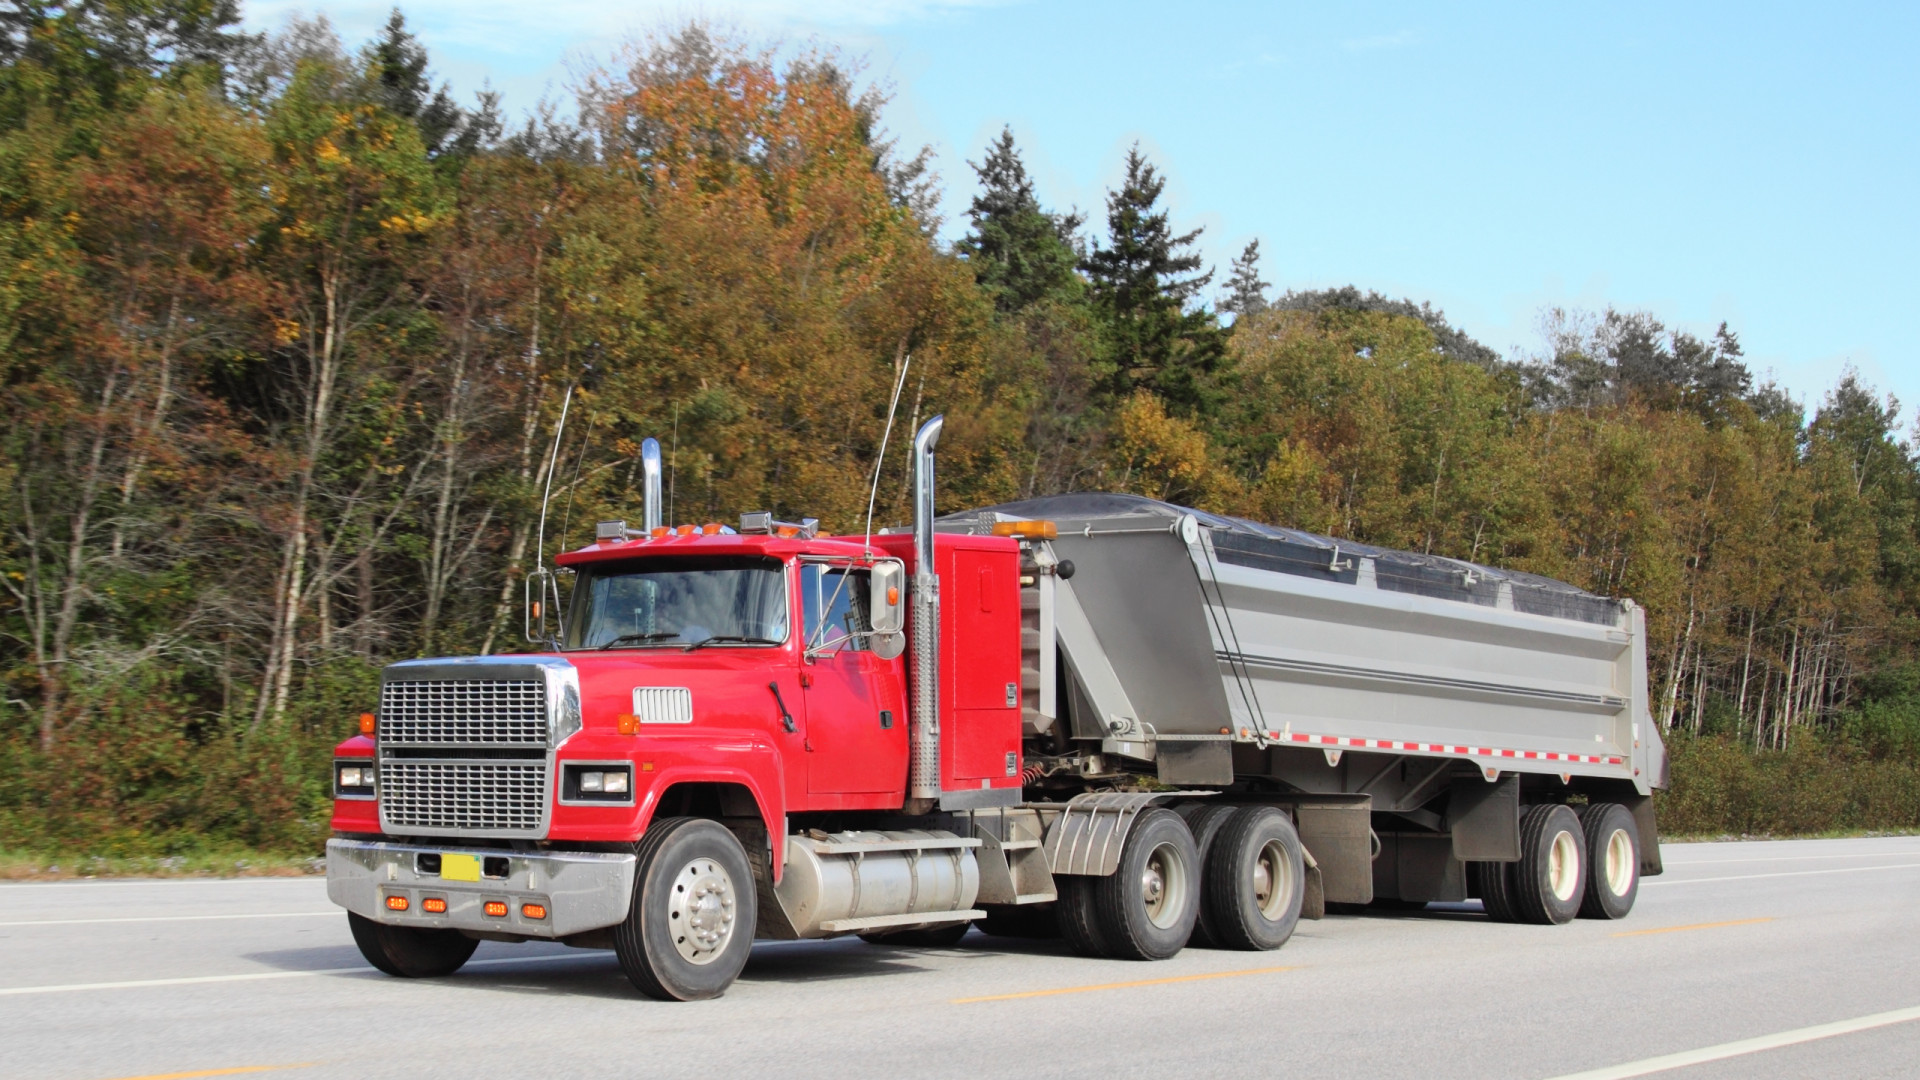 Secure and optimize the use of your dump trucks